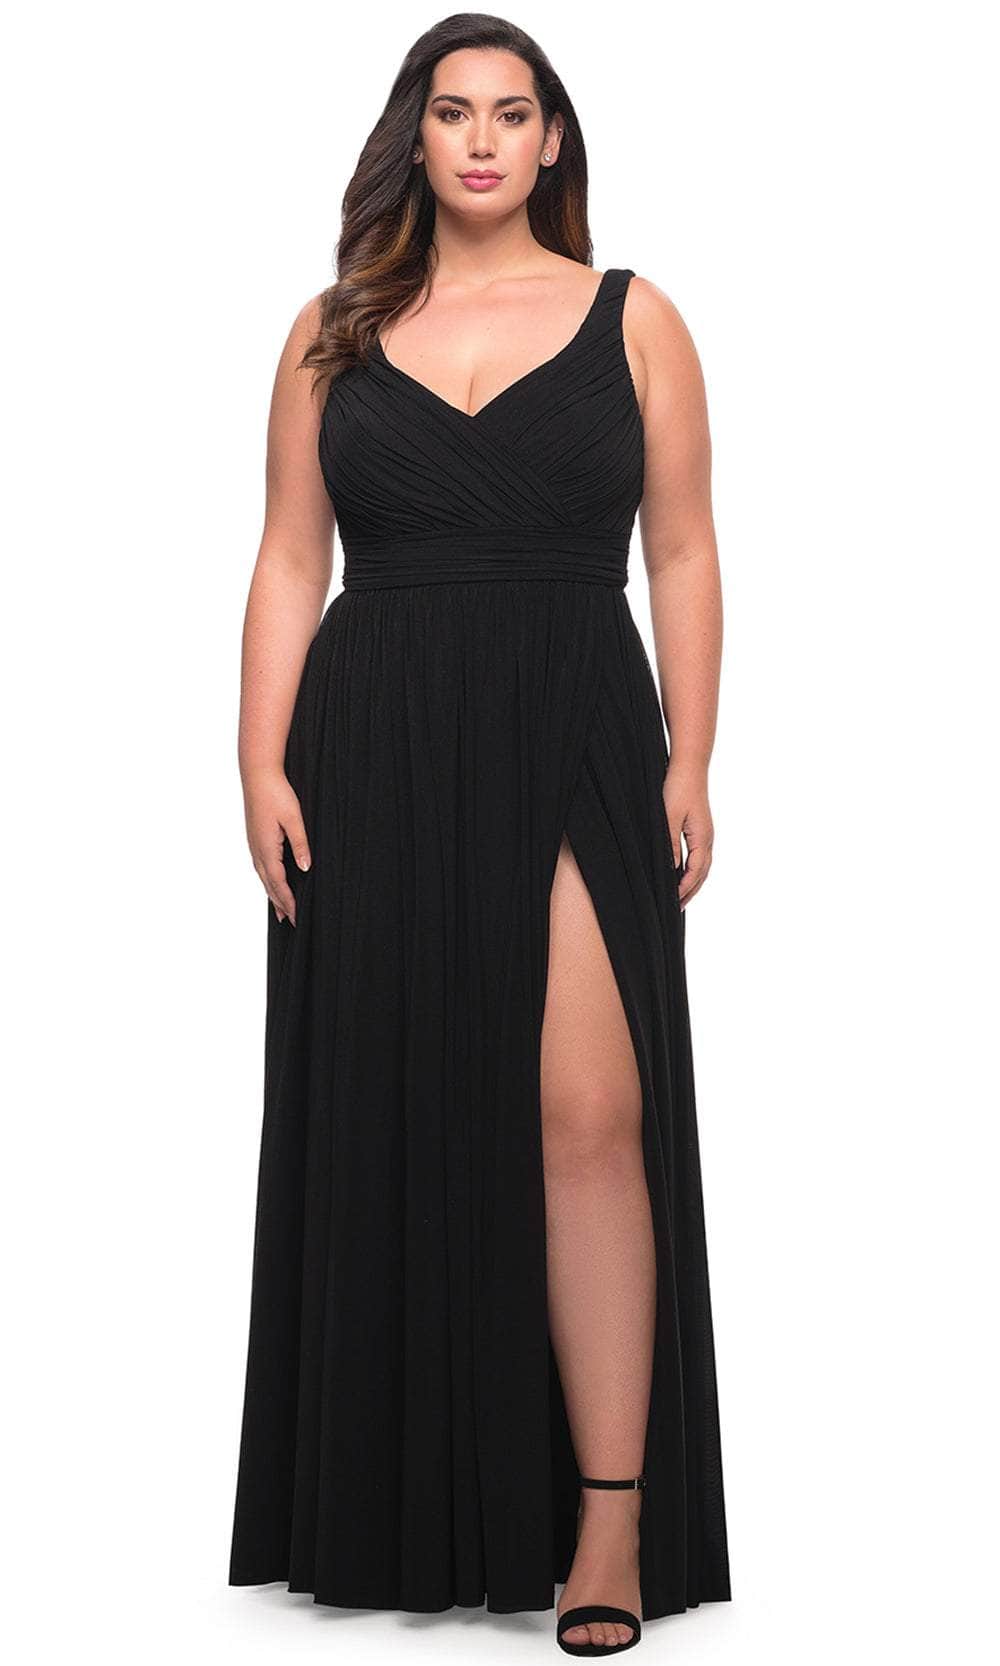 Image of La Femme 29075 - Ruched Sleeveless Prom Gown